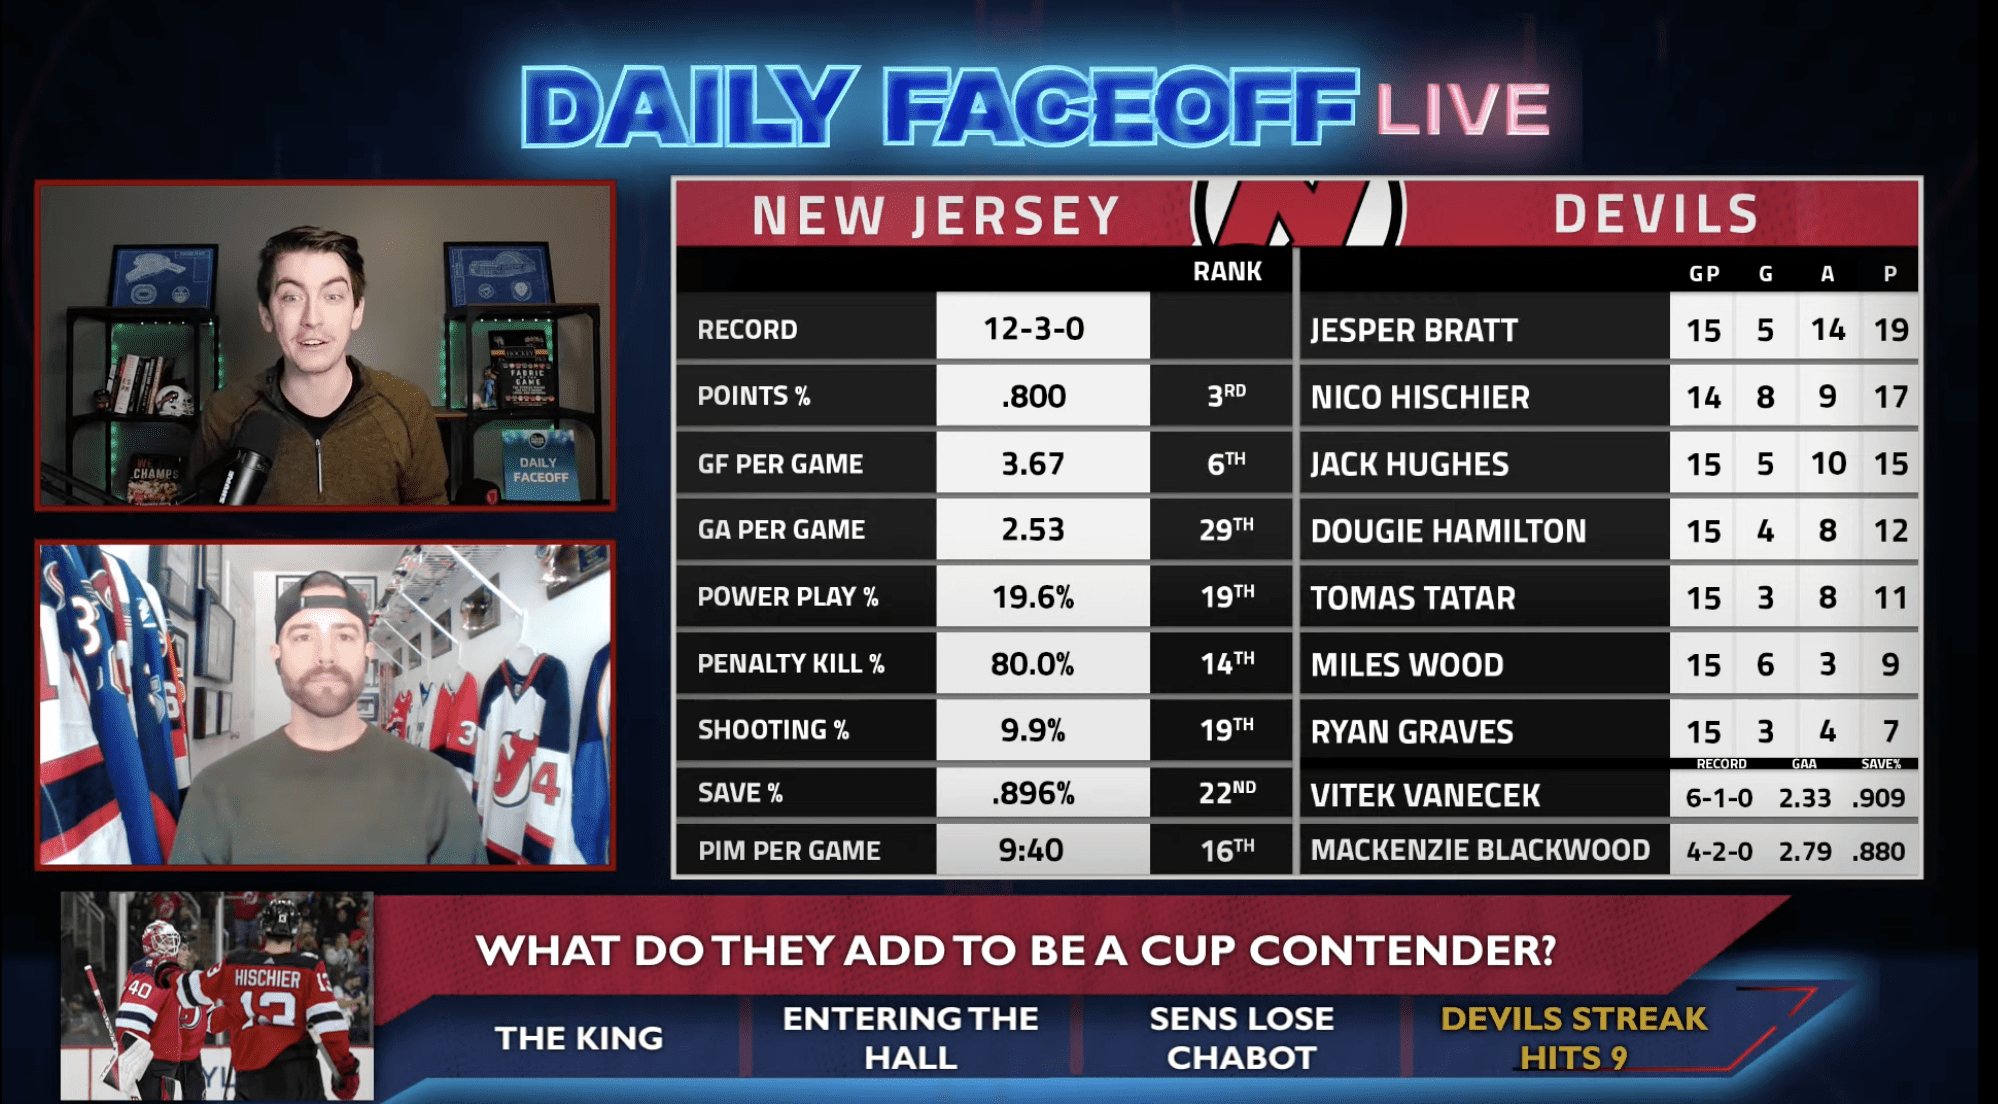 Daily Faceoff Live: What could the Devils add to become a Stanley Cup contender?